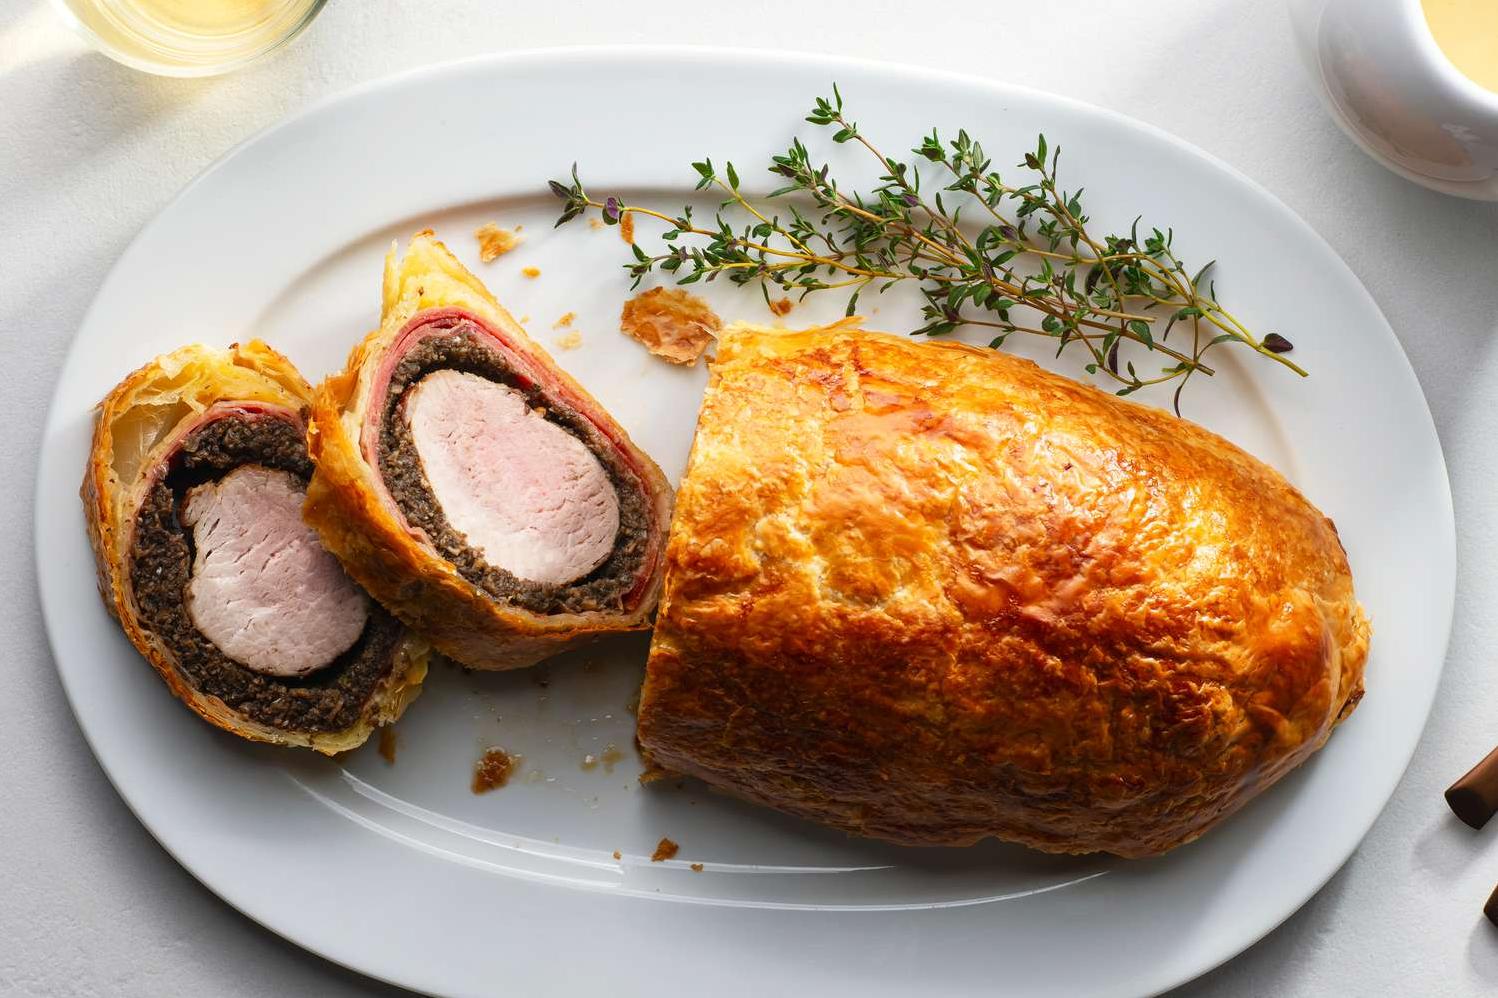  The crispy golden brown exterior of the Pork Wellington is a sight to behold.